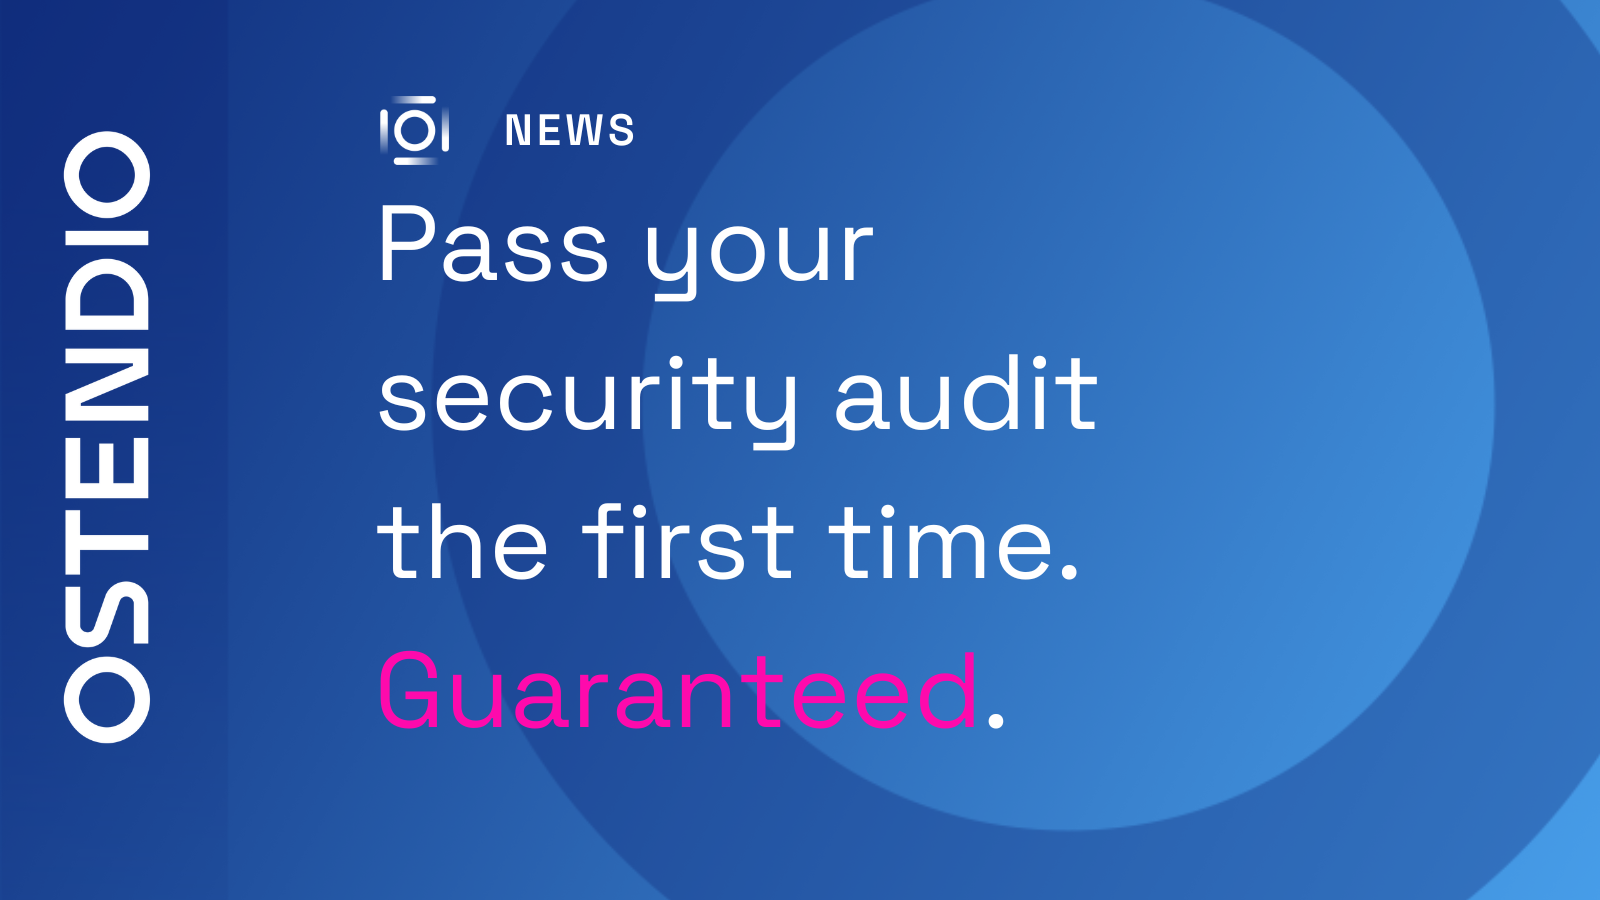 NEW pass security audit first time guaranteed (1)